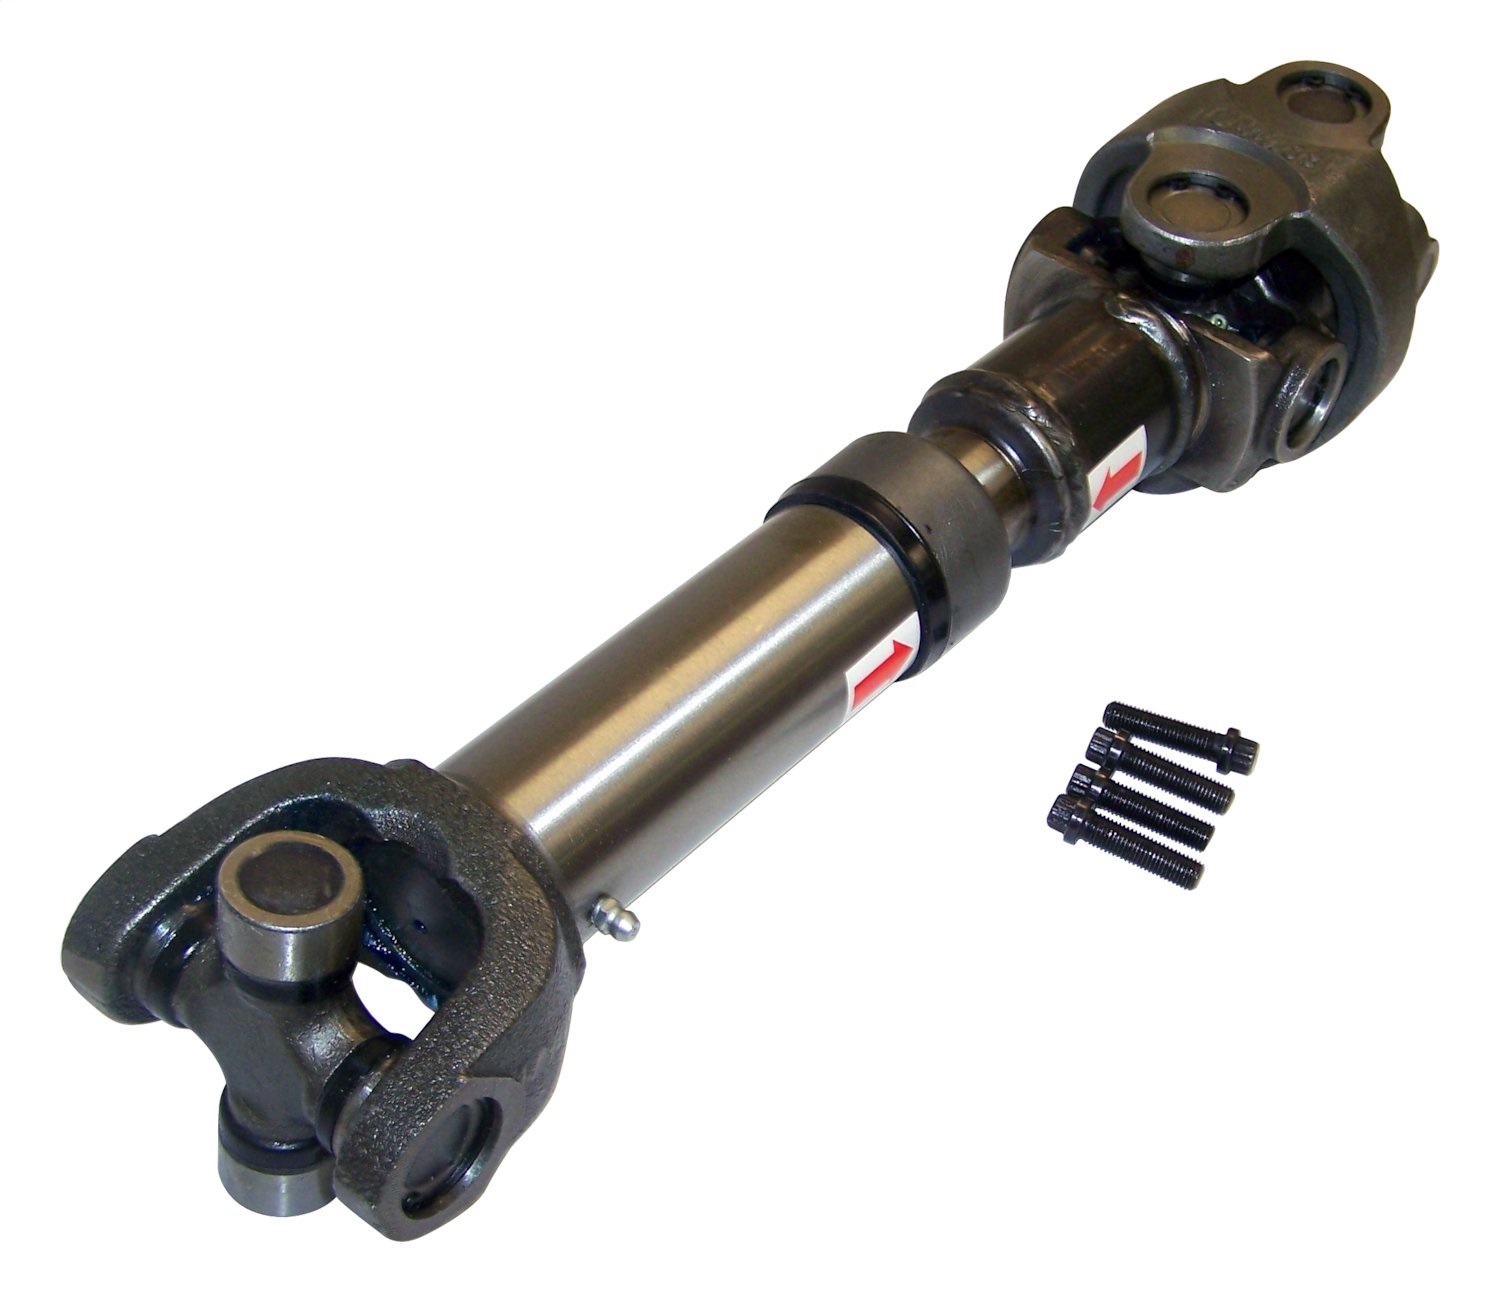 HD Rear Drive Shaft for use with RT24005 Slip Yoke Eliminator Kit for NP231 T.C.